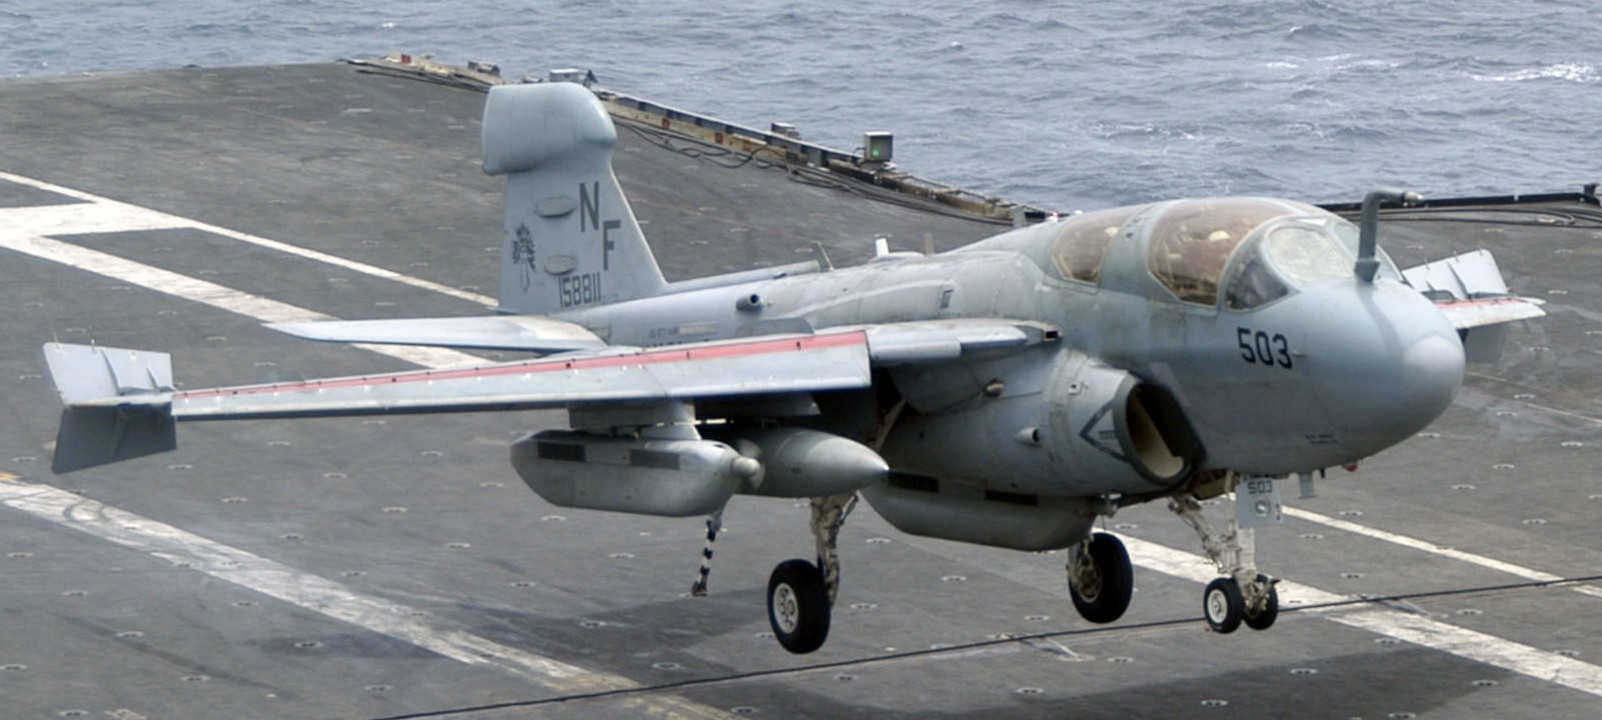 vaq-136 gauntlets electronic attack squadron vaqron us navy ea-6b prowler carrier air wing cvw-5 uss kitty hawk cv-63 56